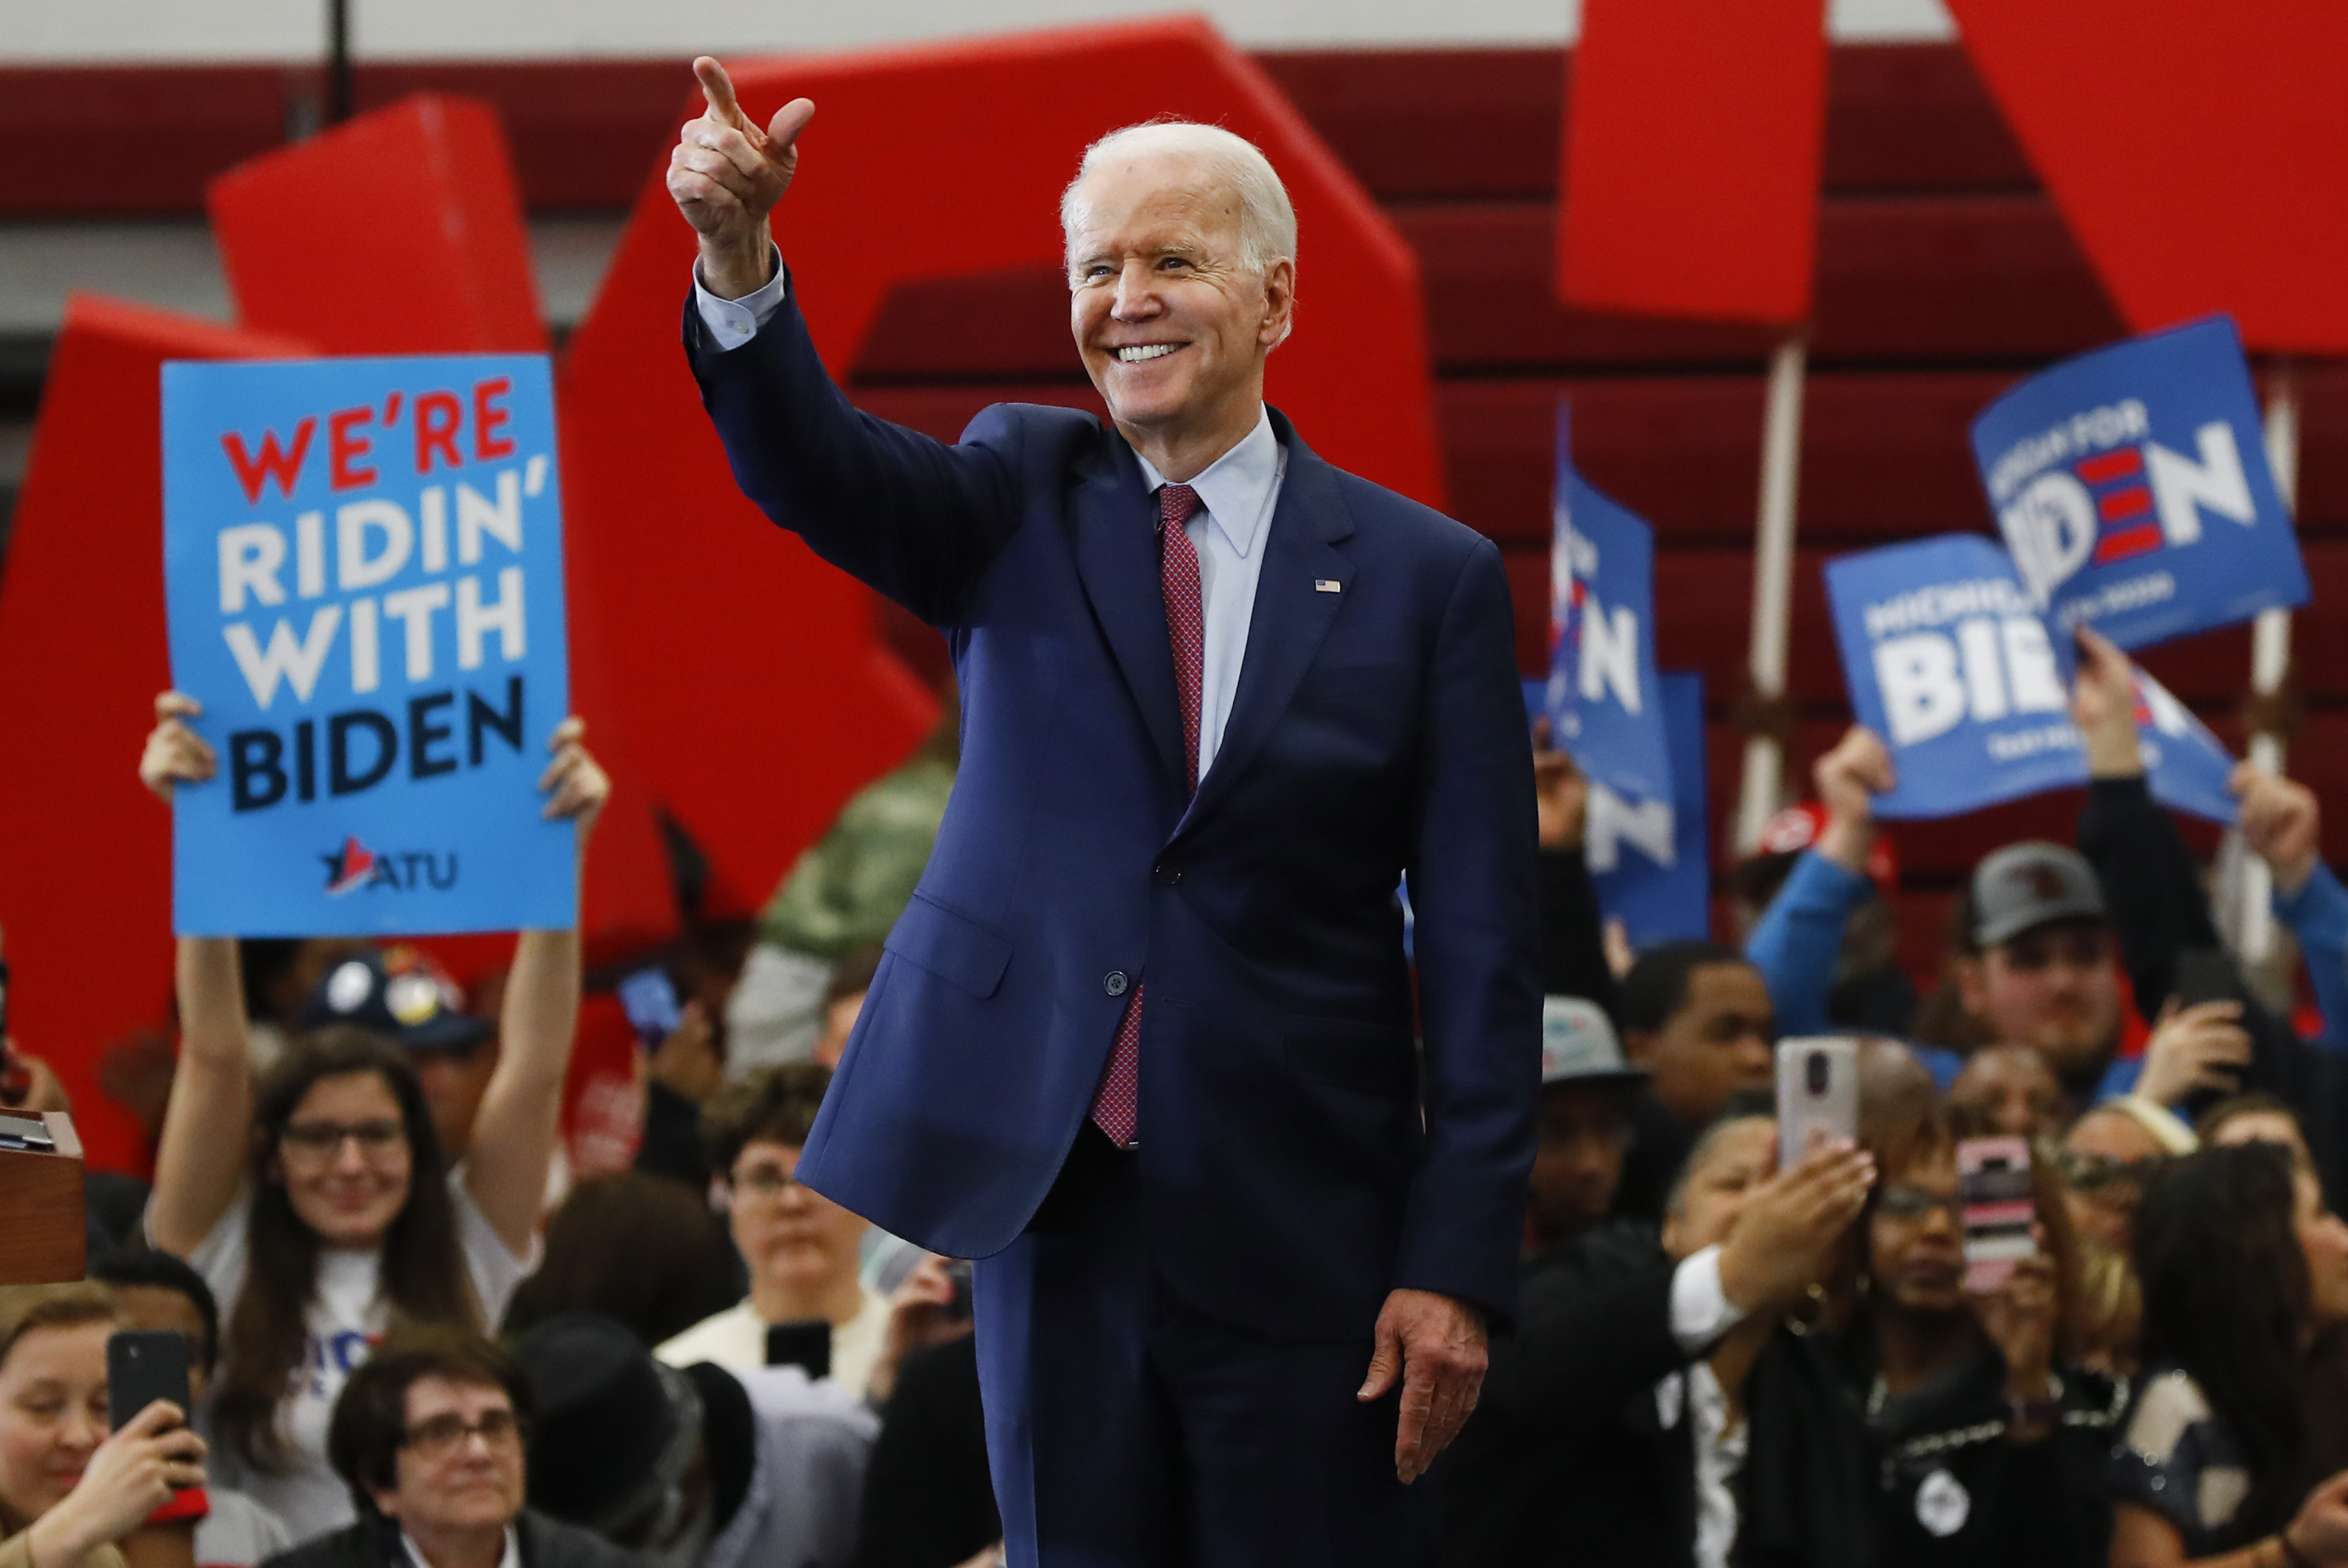 Joe Biden : Every American to receive Rs 1 lakh in their accounts